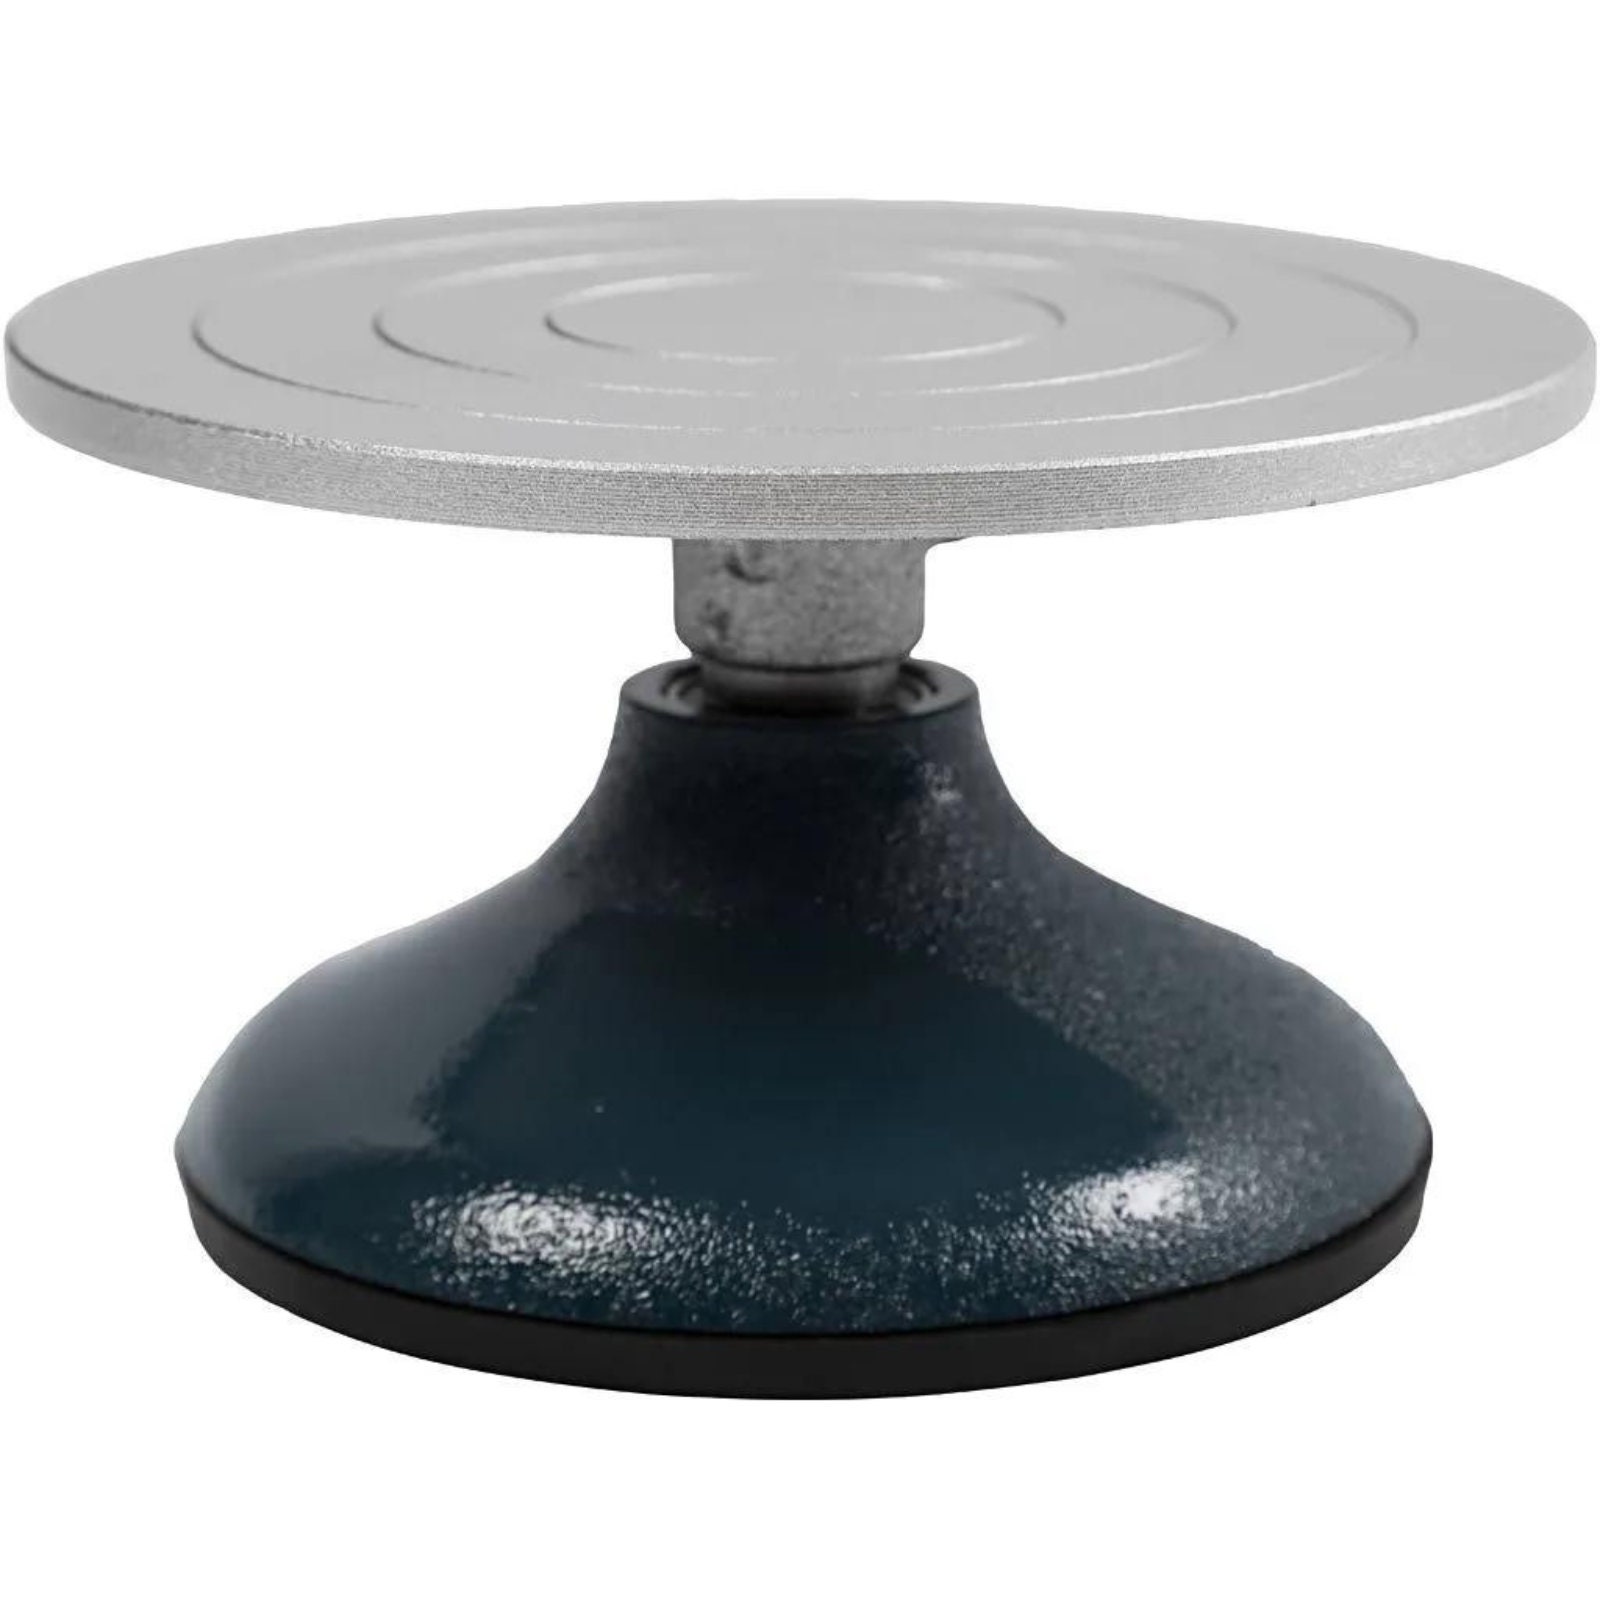 Sculpting Wheel Turntable Painting Turn Table for Ceramic Baking